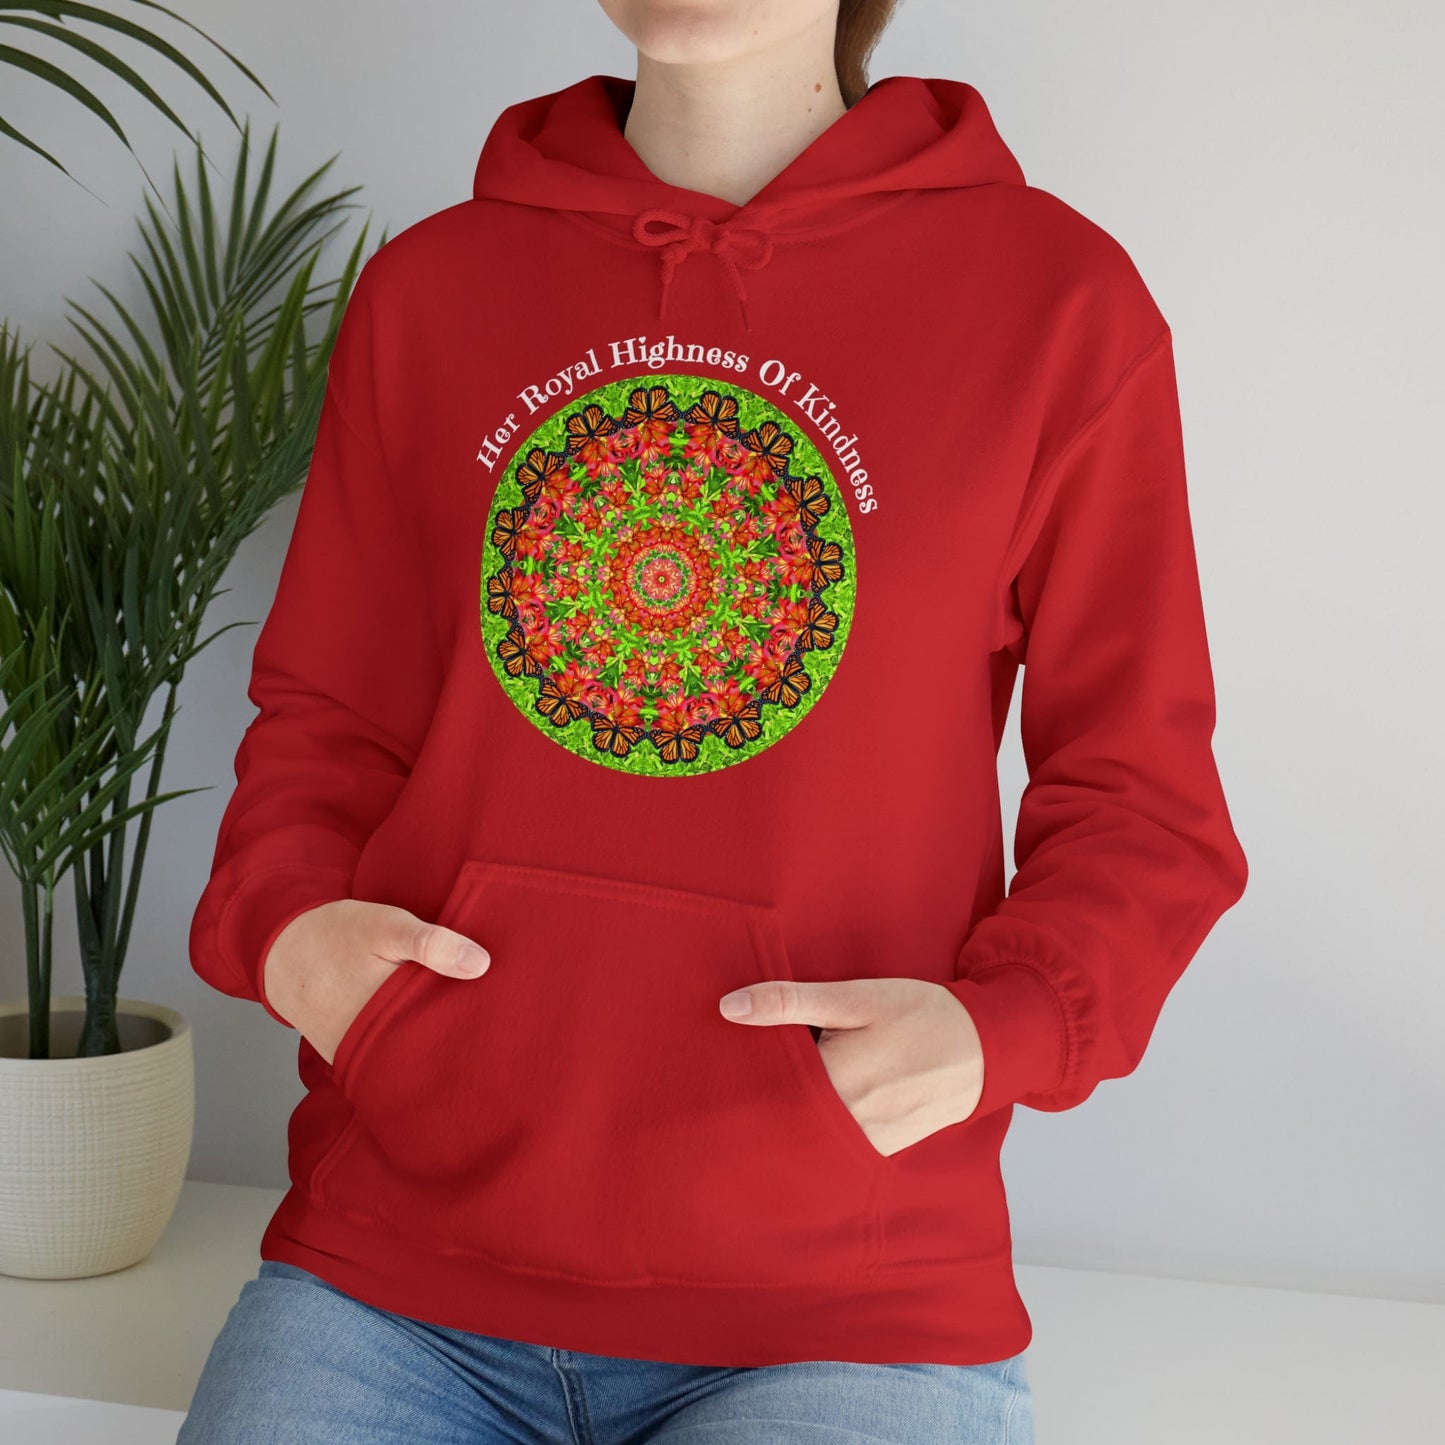 Monarch Butterfly Love Sweatshirt Pullover Hoodie – Her Royal Highness Of Kindness red